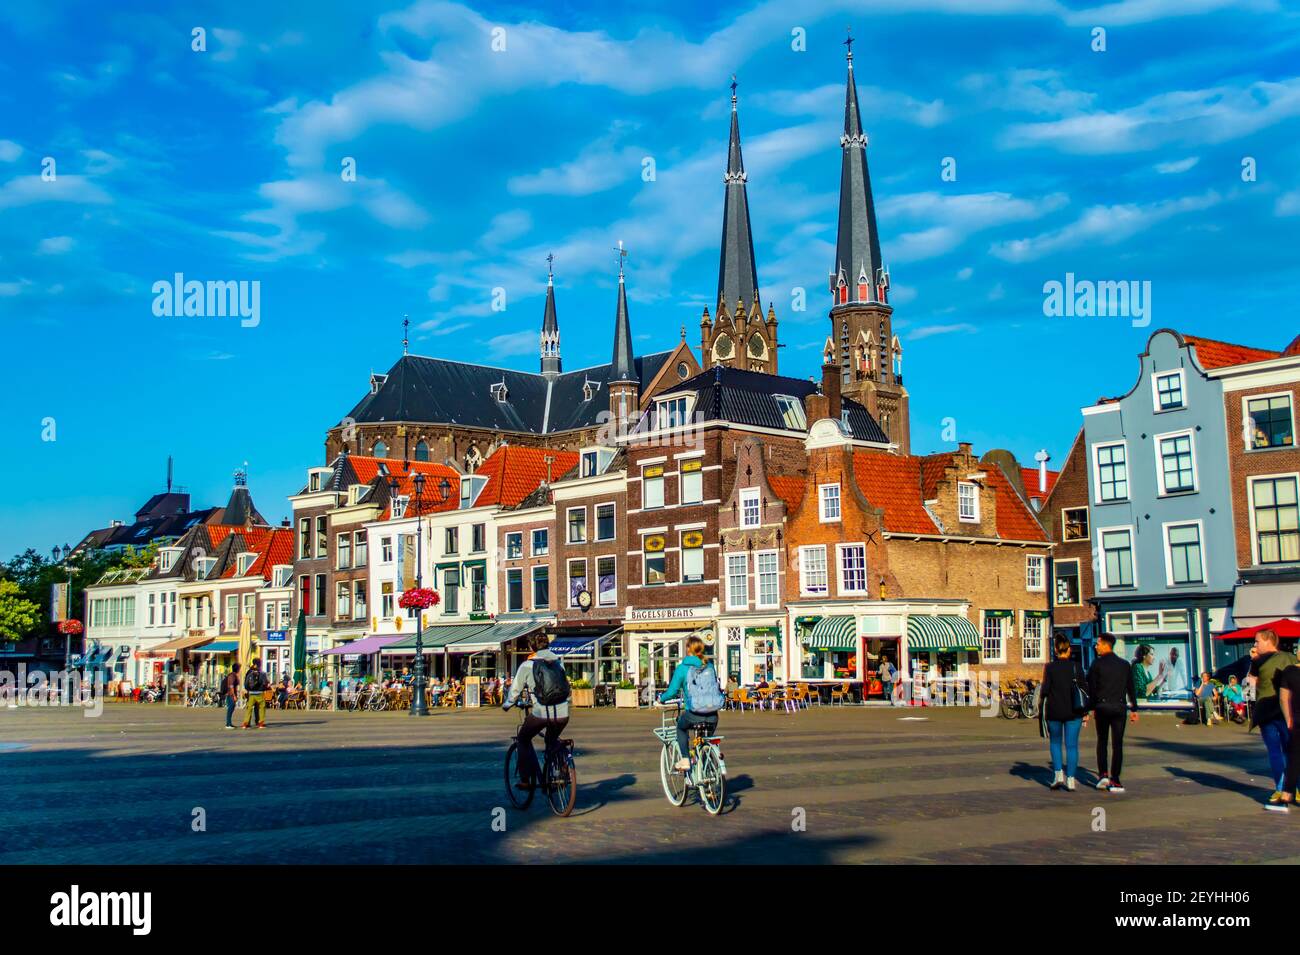 Delft, Netherlands - July 11, 2019: People and cyclists on the Markt square ('Market square') of the town of Delft in the Netherlands Stock Photo